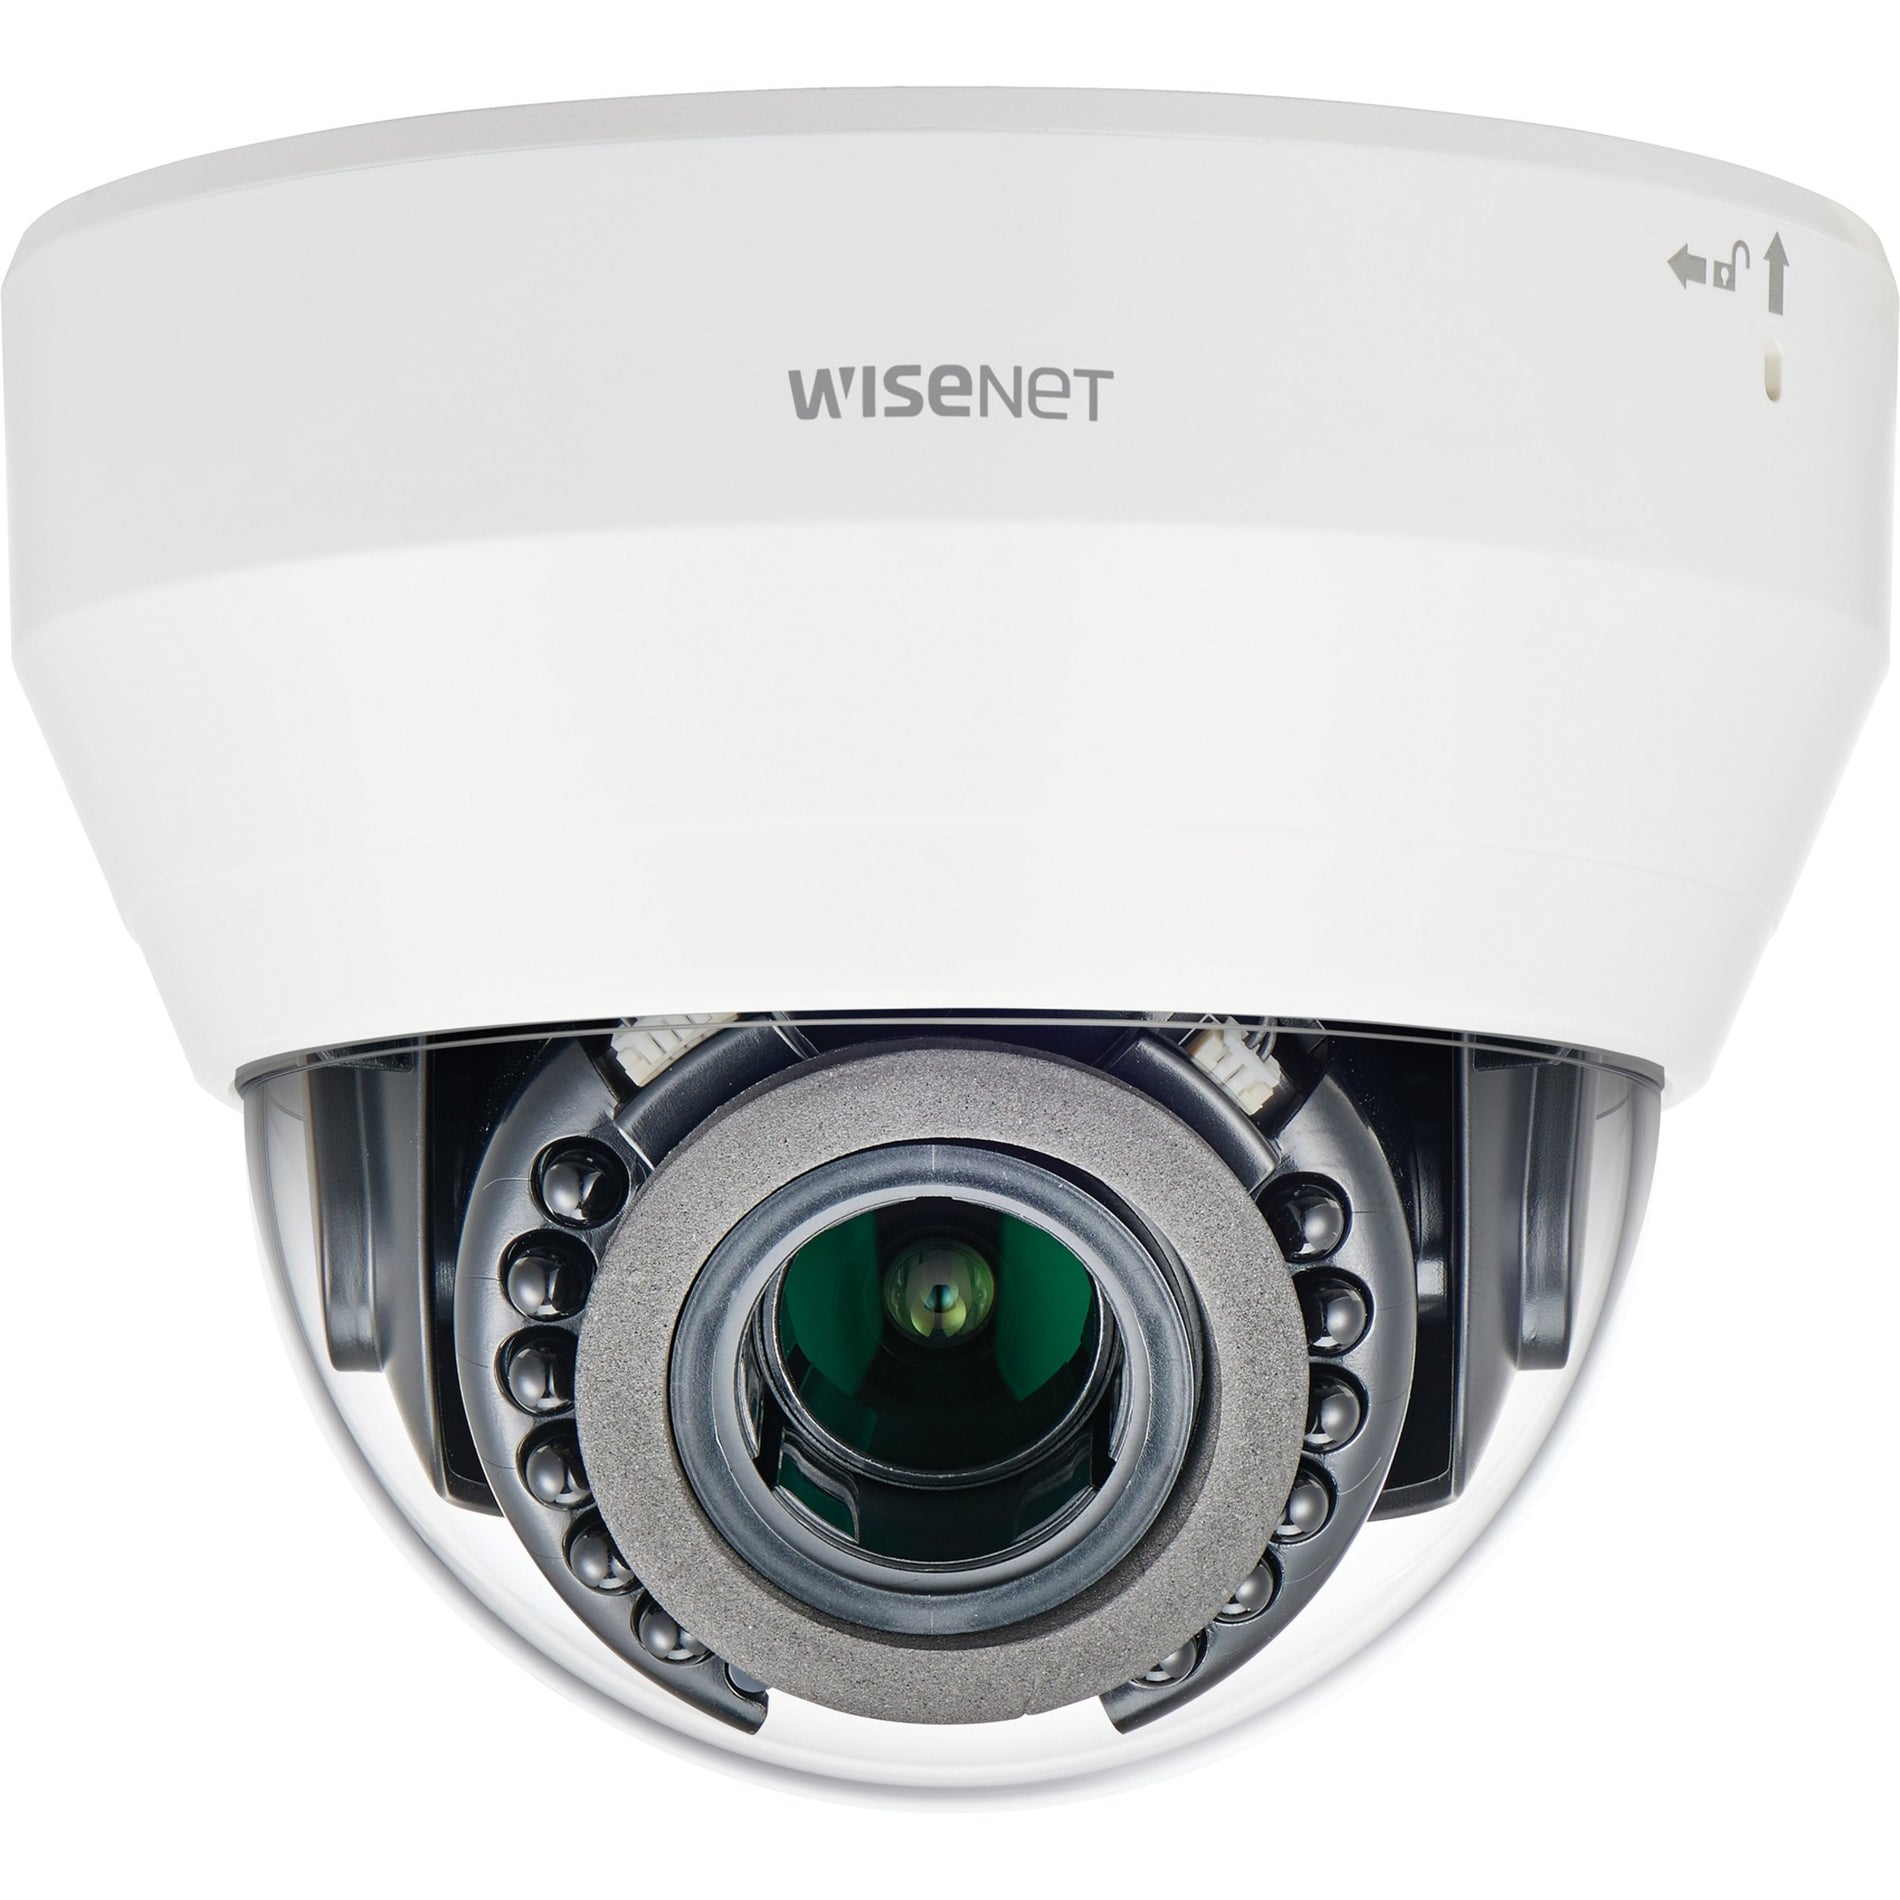 Wisenet LND-6012R 2MP IR Dome Camera, Indoor, 30fps, 3mm Fixed Focal Lens, Double Codec, 120dB WDR, SD Card, PoE, White